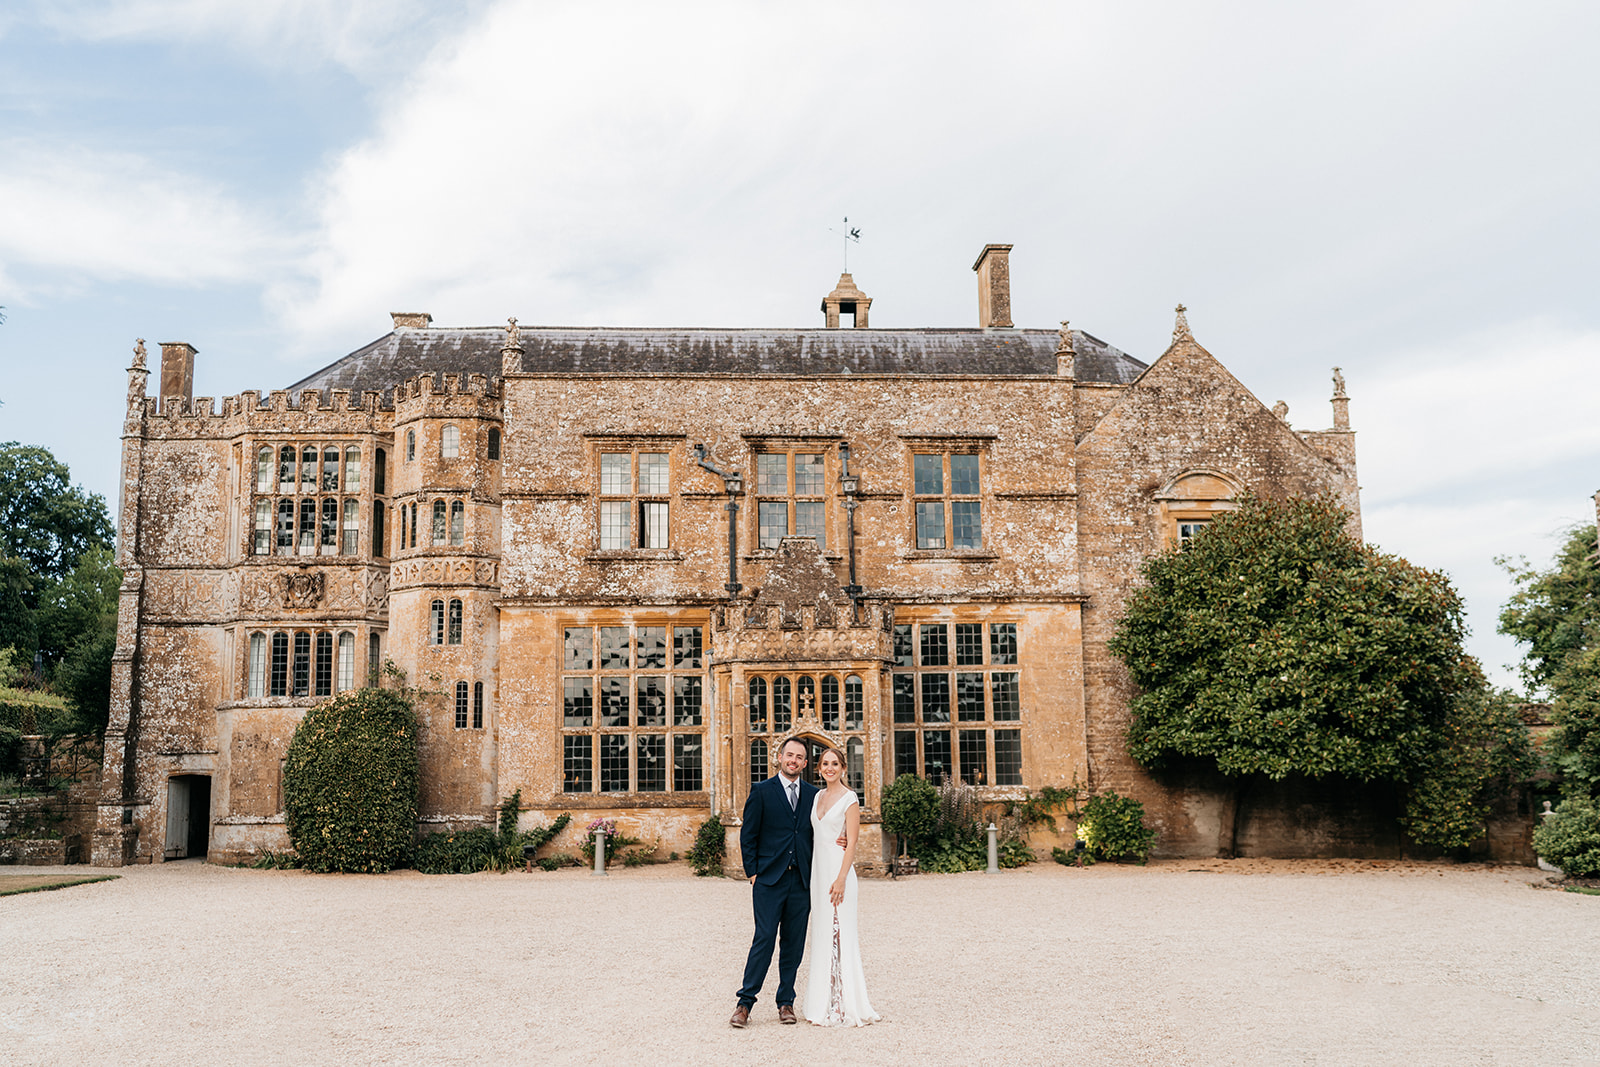 The bride and groom infront of the stunning Brympton House in Somerset